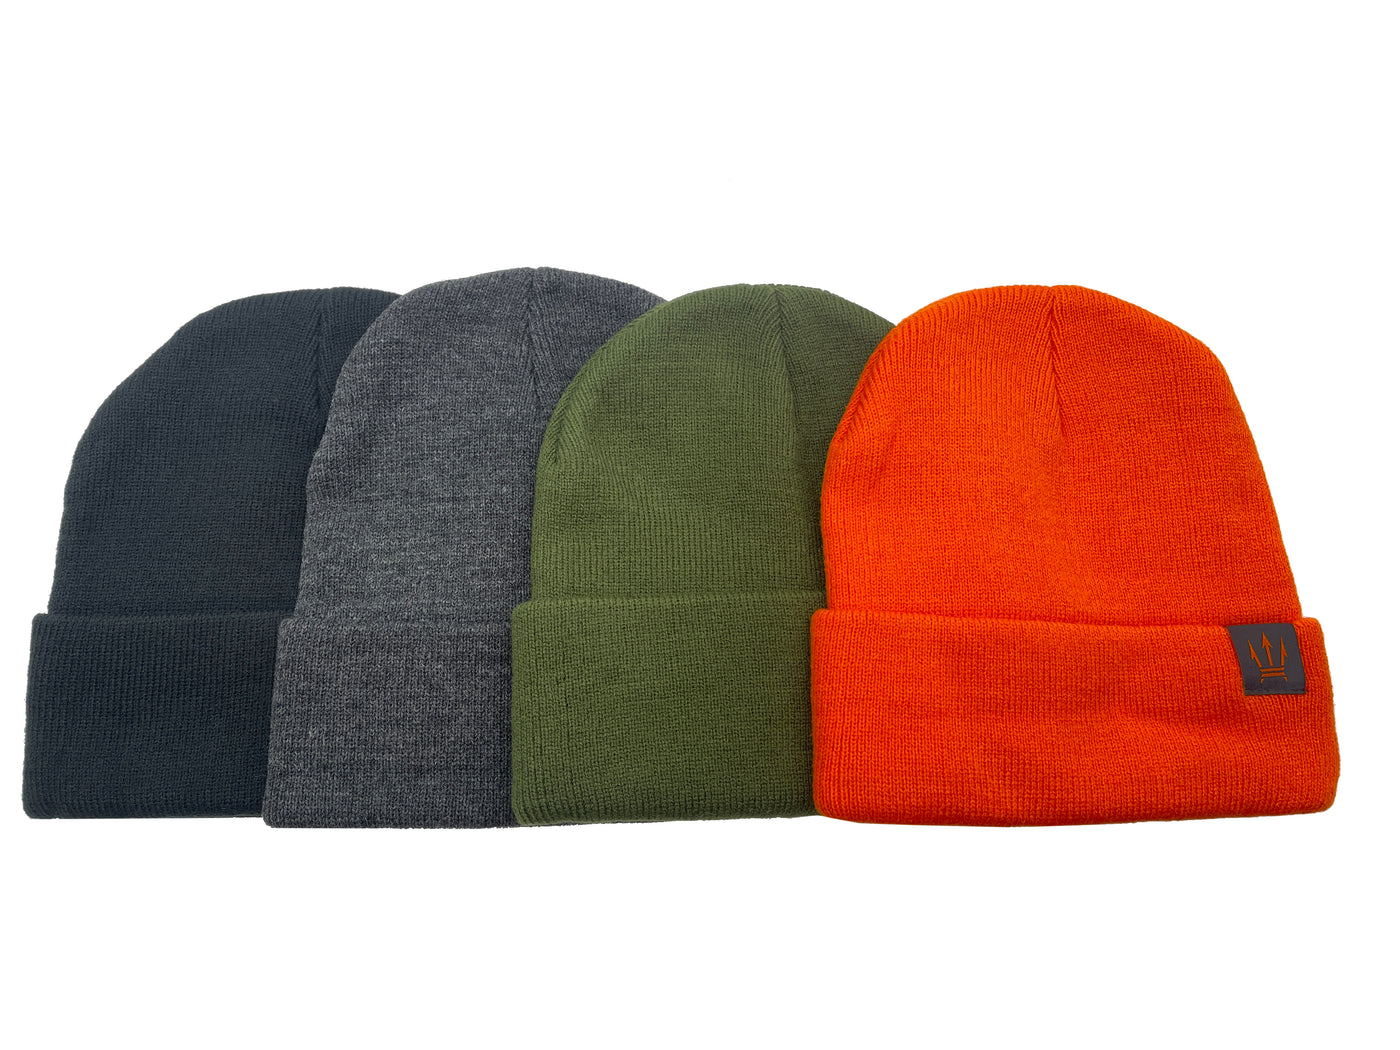 Isotherm - Trident Knit Beanie by Maratac®